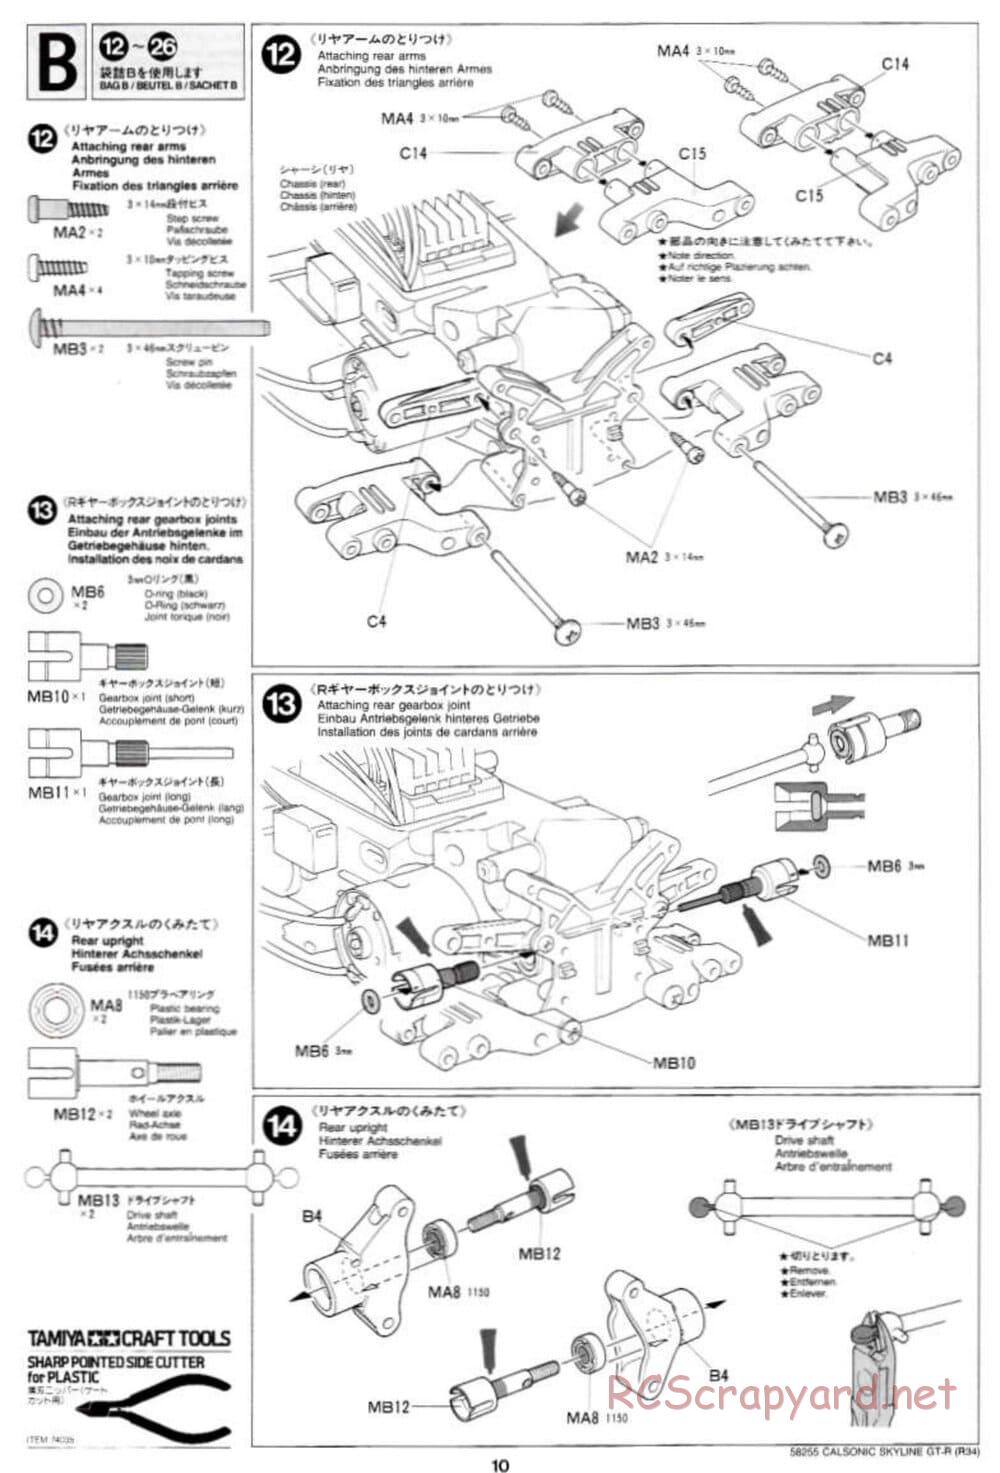 Tamiya - Calsonic Skyline GT-R (R34) - TL-01 Chassis - Manual - Page 10